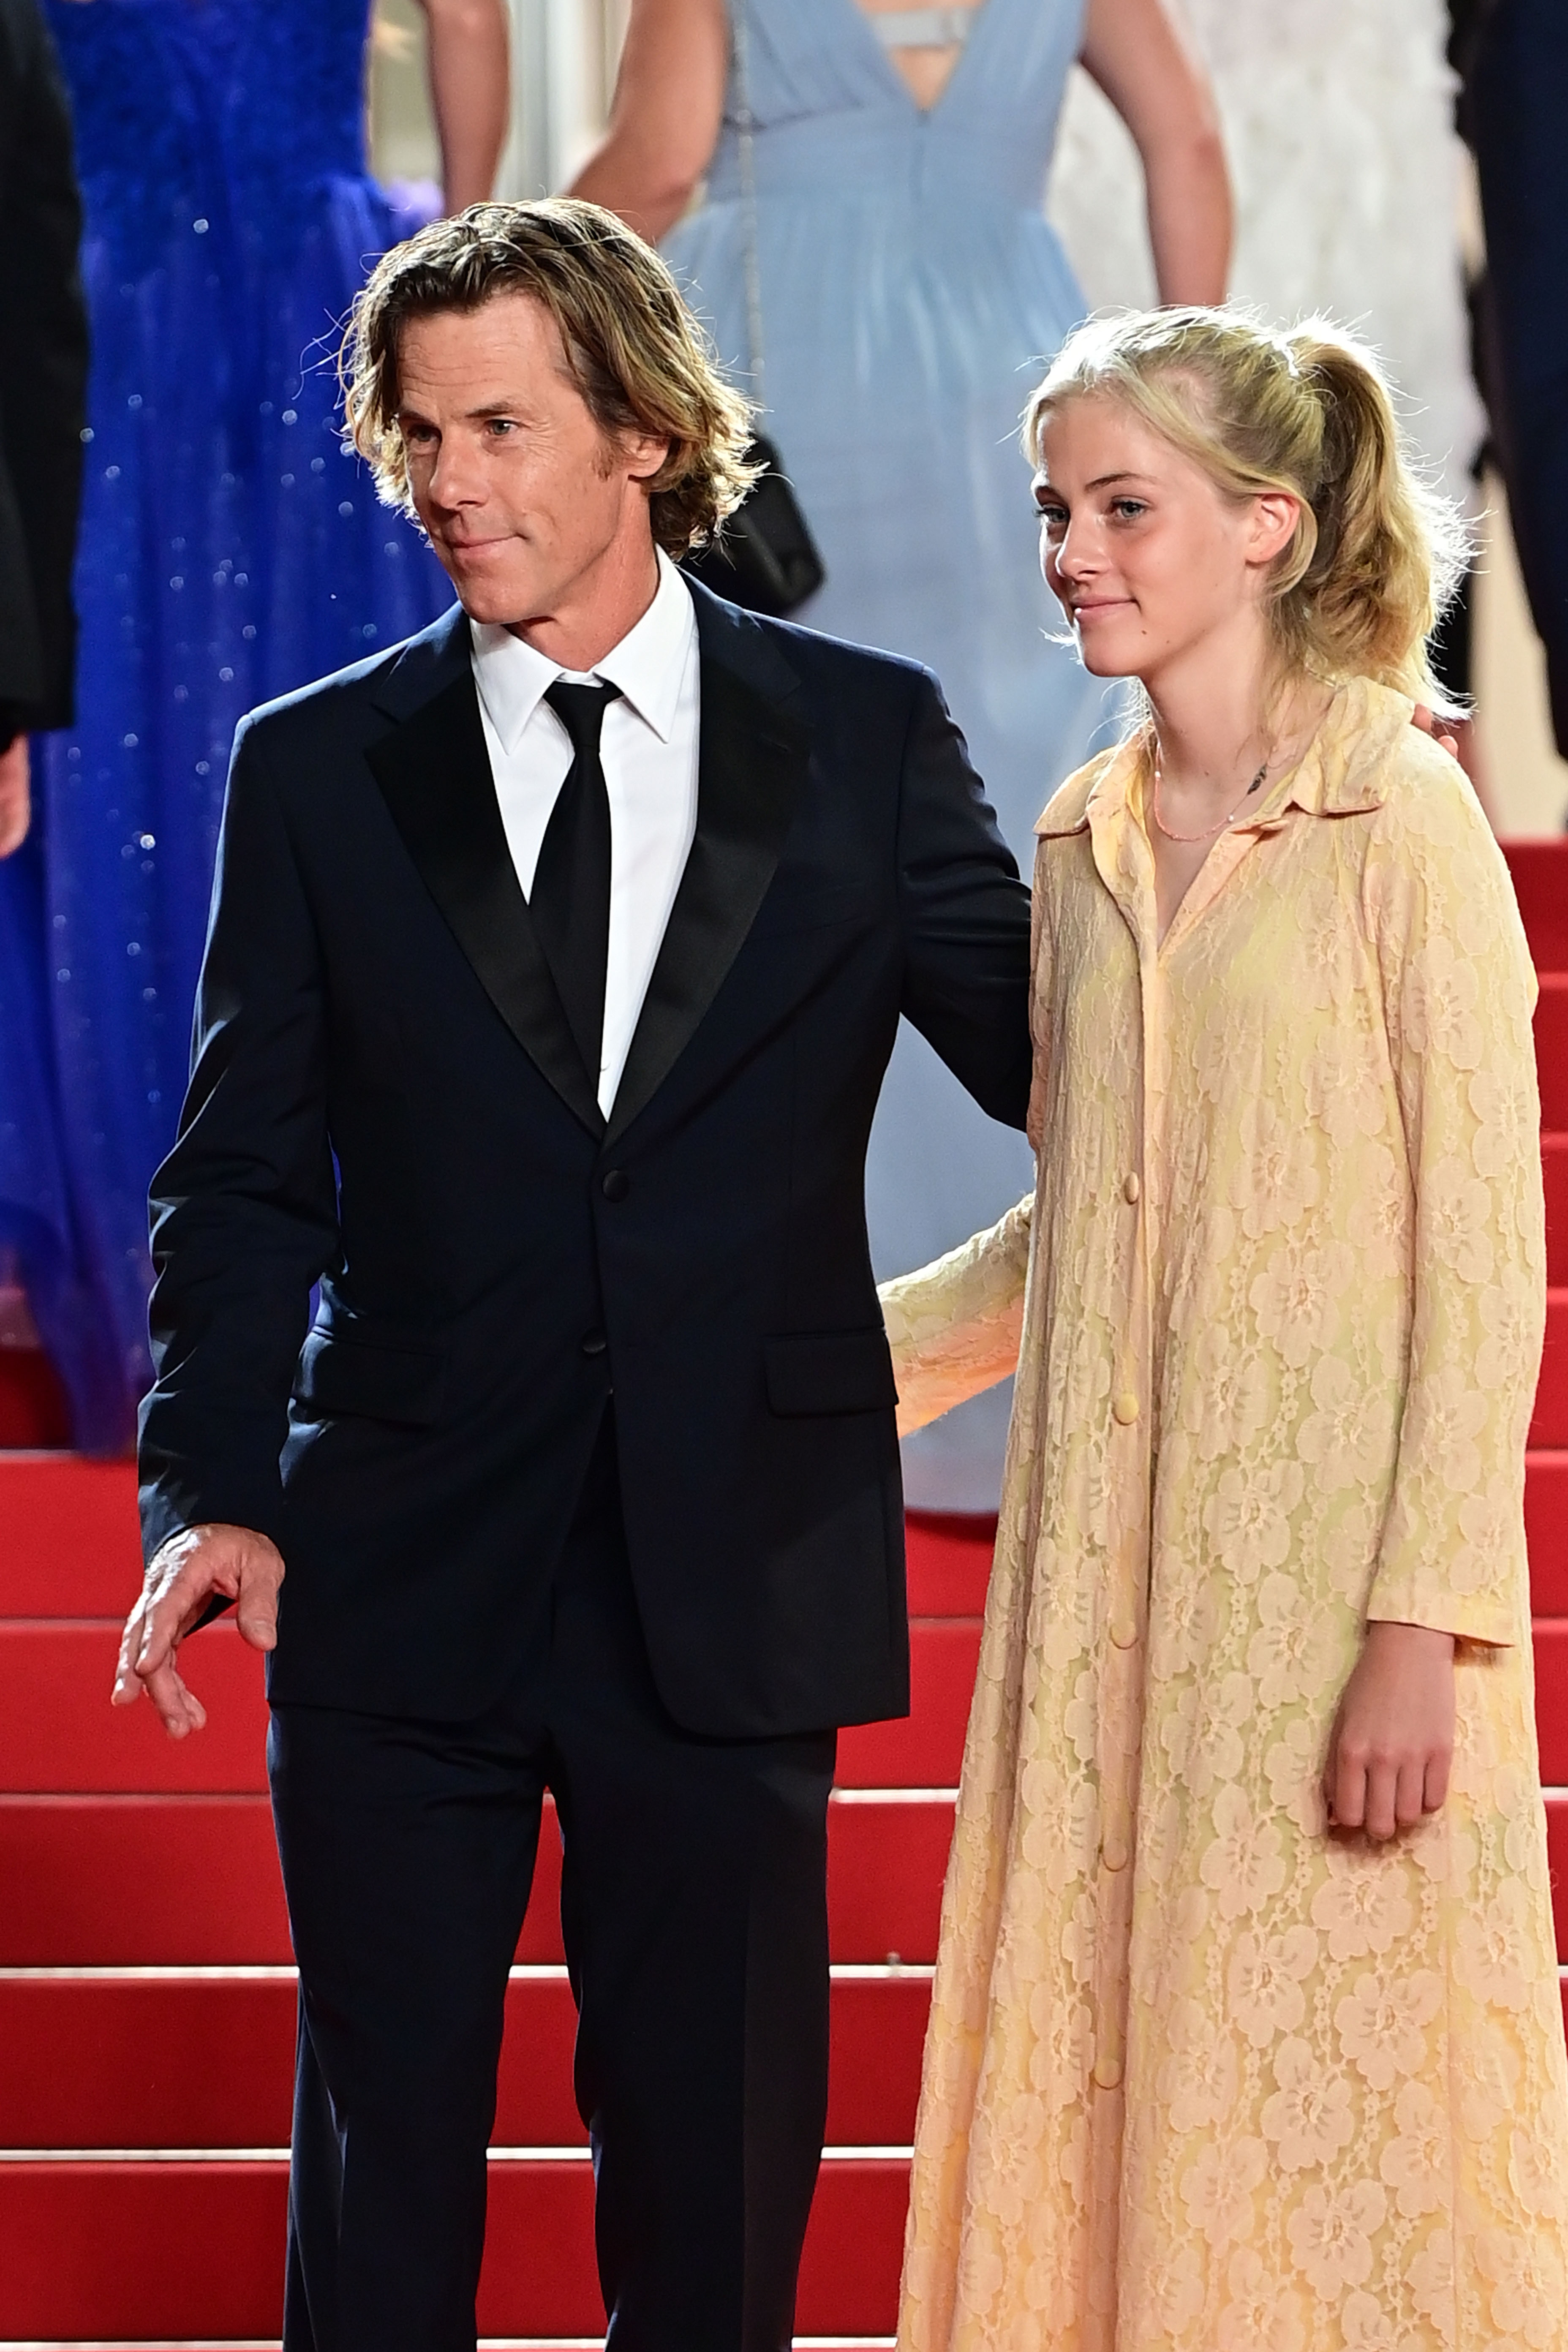 Danny Moder and Hazel Moder arrive at the premiere of "Flag Day" during the 74th Cannes Film Festival in Cannes, France, on July 10, 2021. | Source: Getty Images